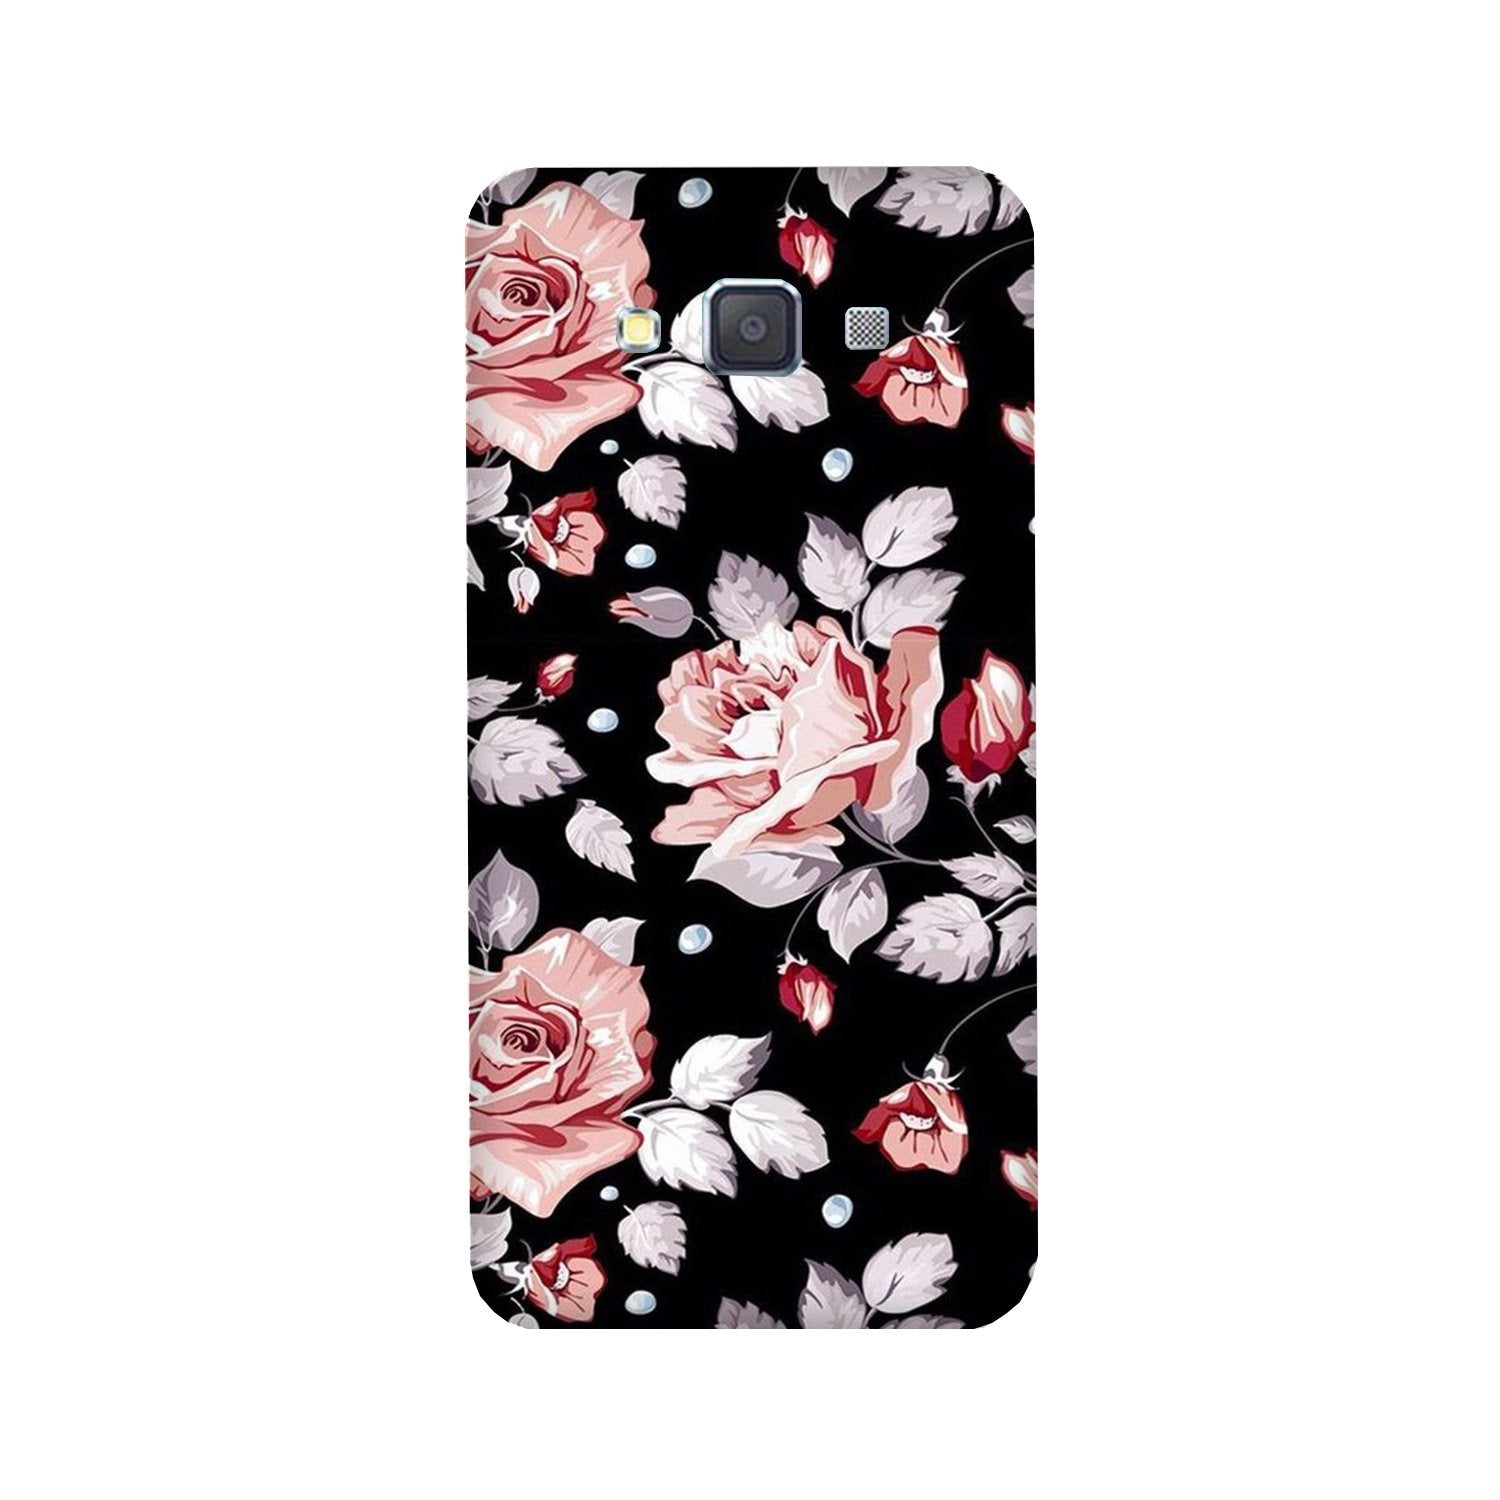 Pink rose Case for Galaxy J5 (2016)